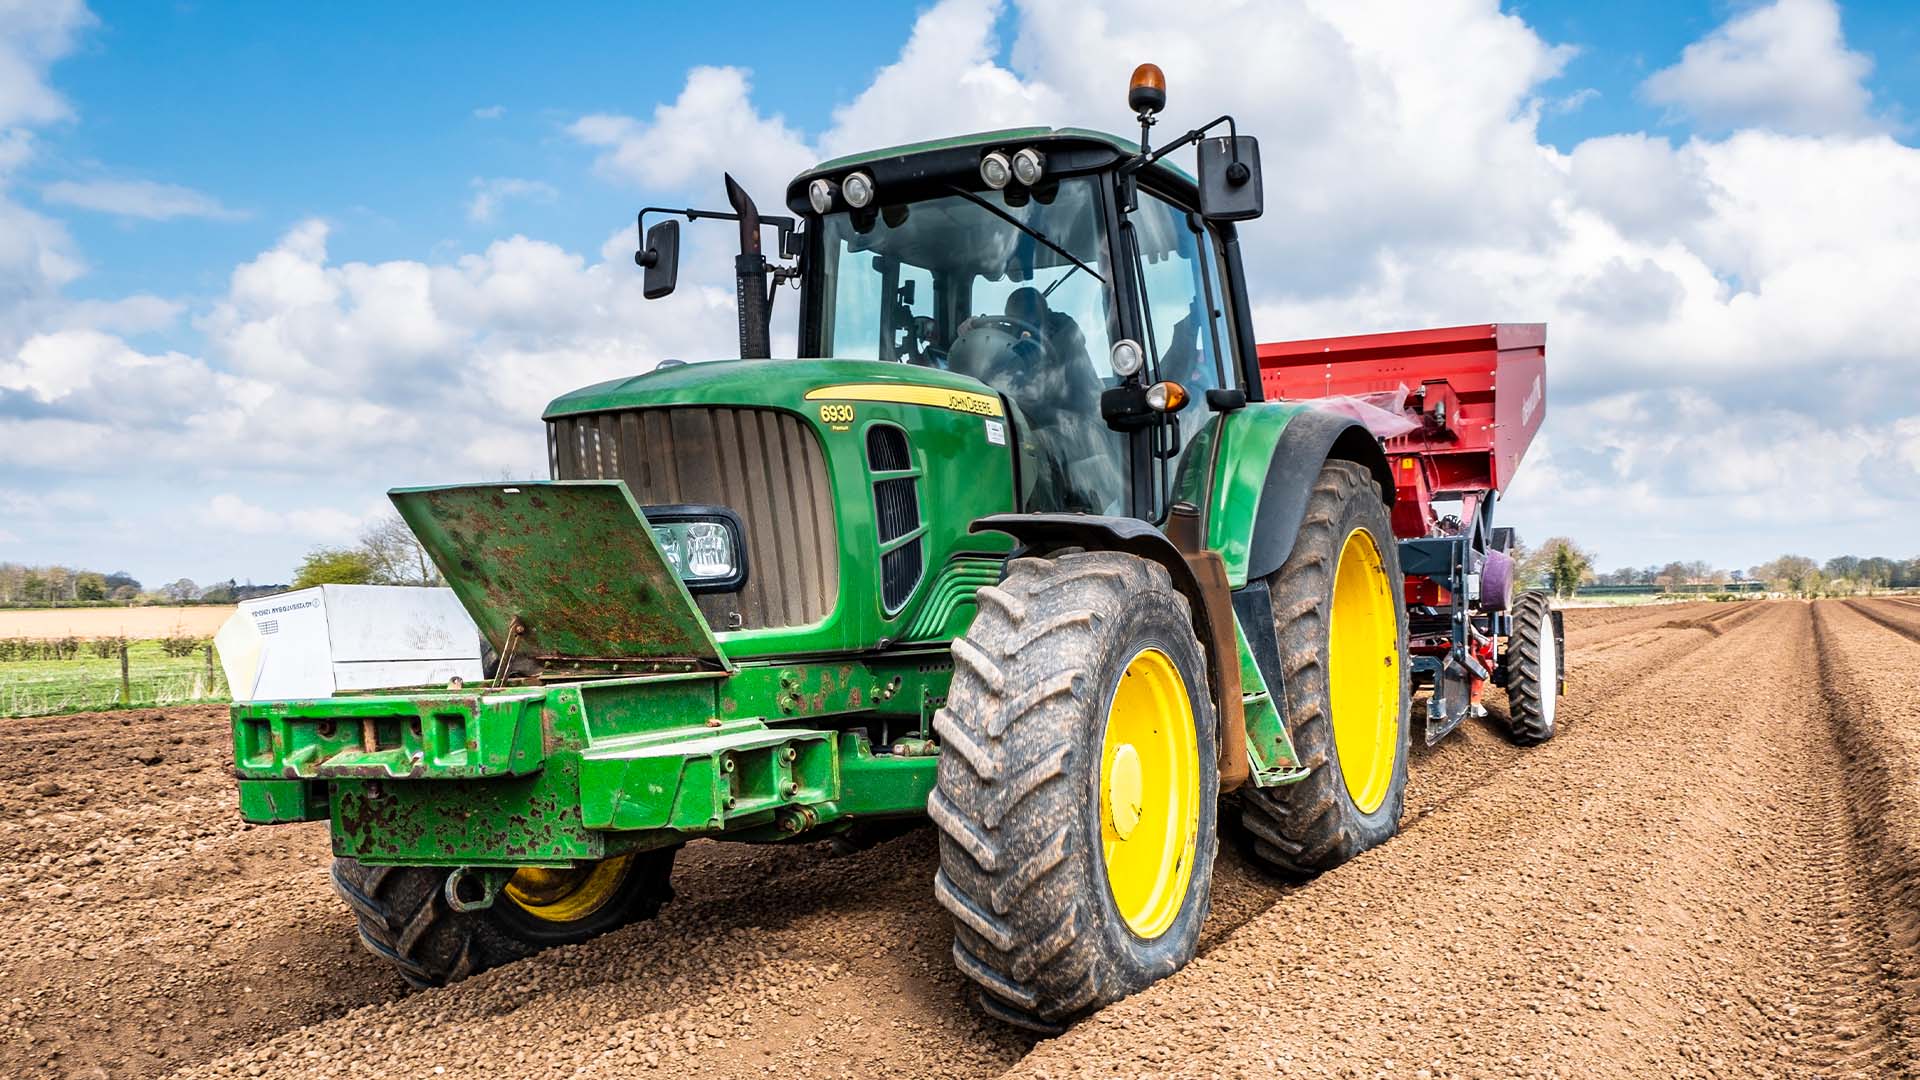 Right to repair agreement signed for John Deere products